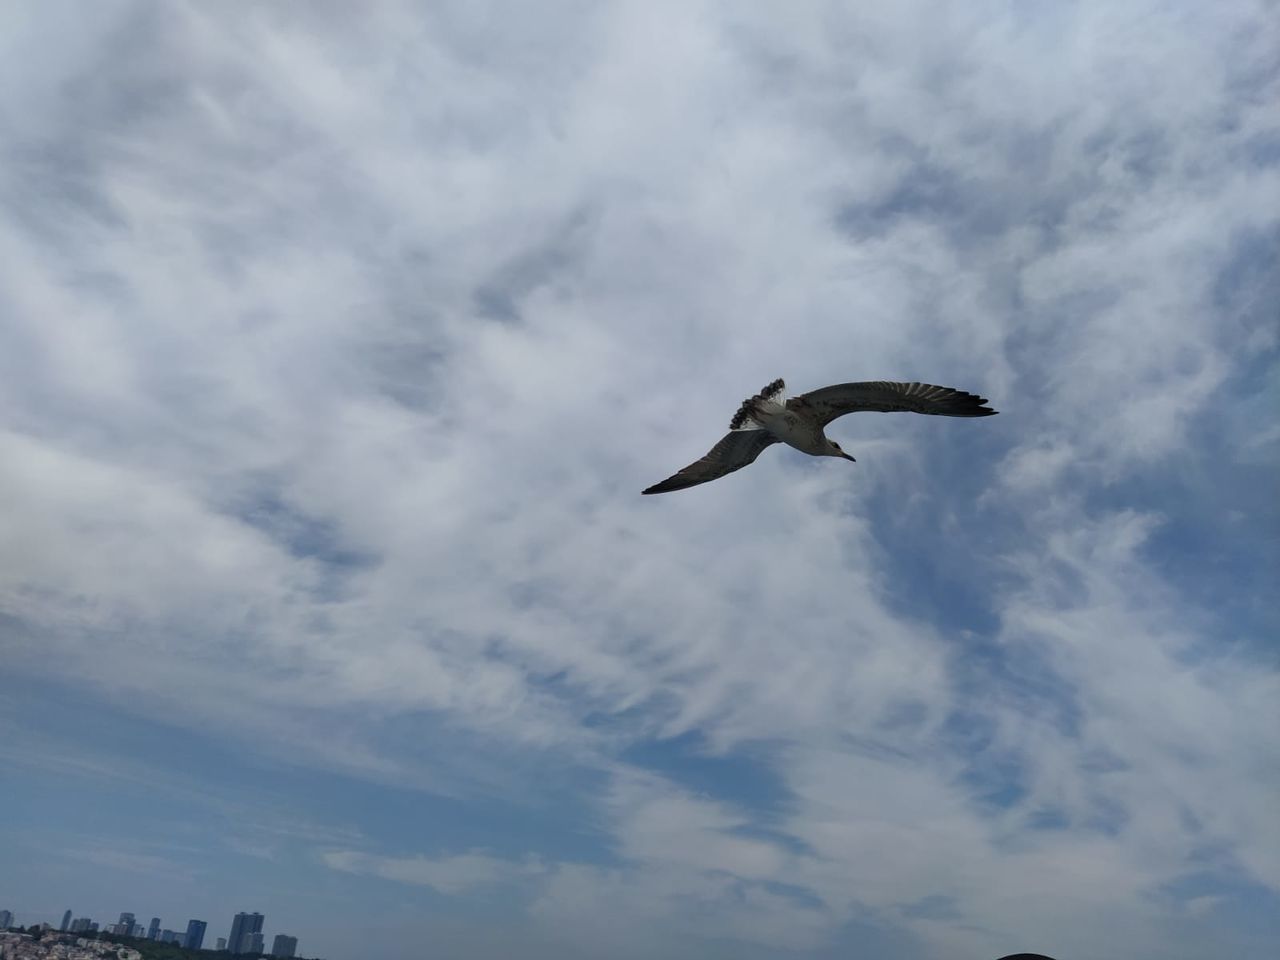 flying, animal themes, animal, animal wildlife, bird, wildlife, cloud, sky, one animal, spread wings, animal body part, mid-air, nature, low angle view, seabird, gull, no people, outdoors, day, motion, animal wing, wing, beauty in nature, full length, blue